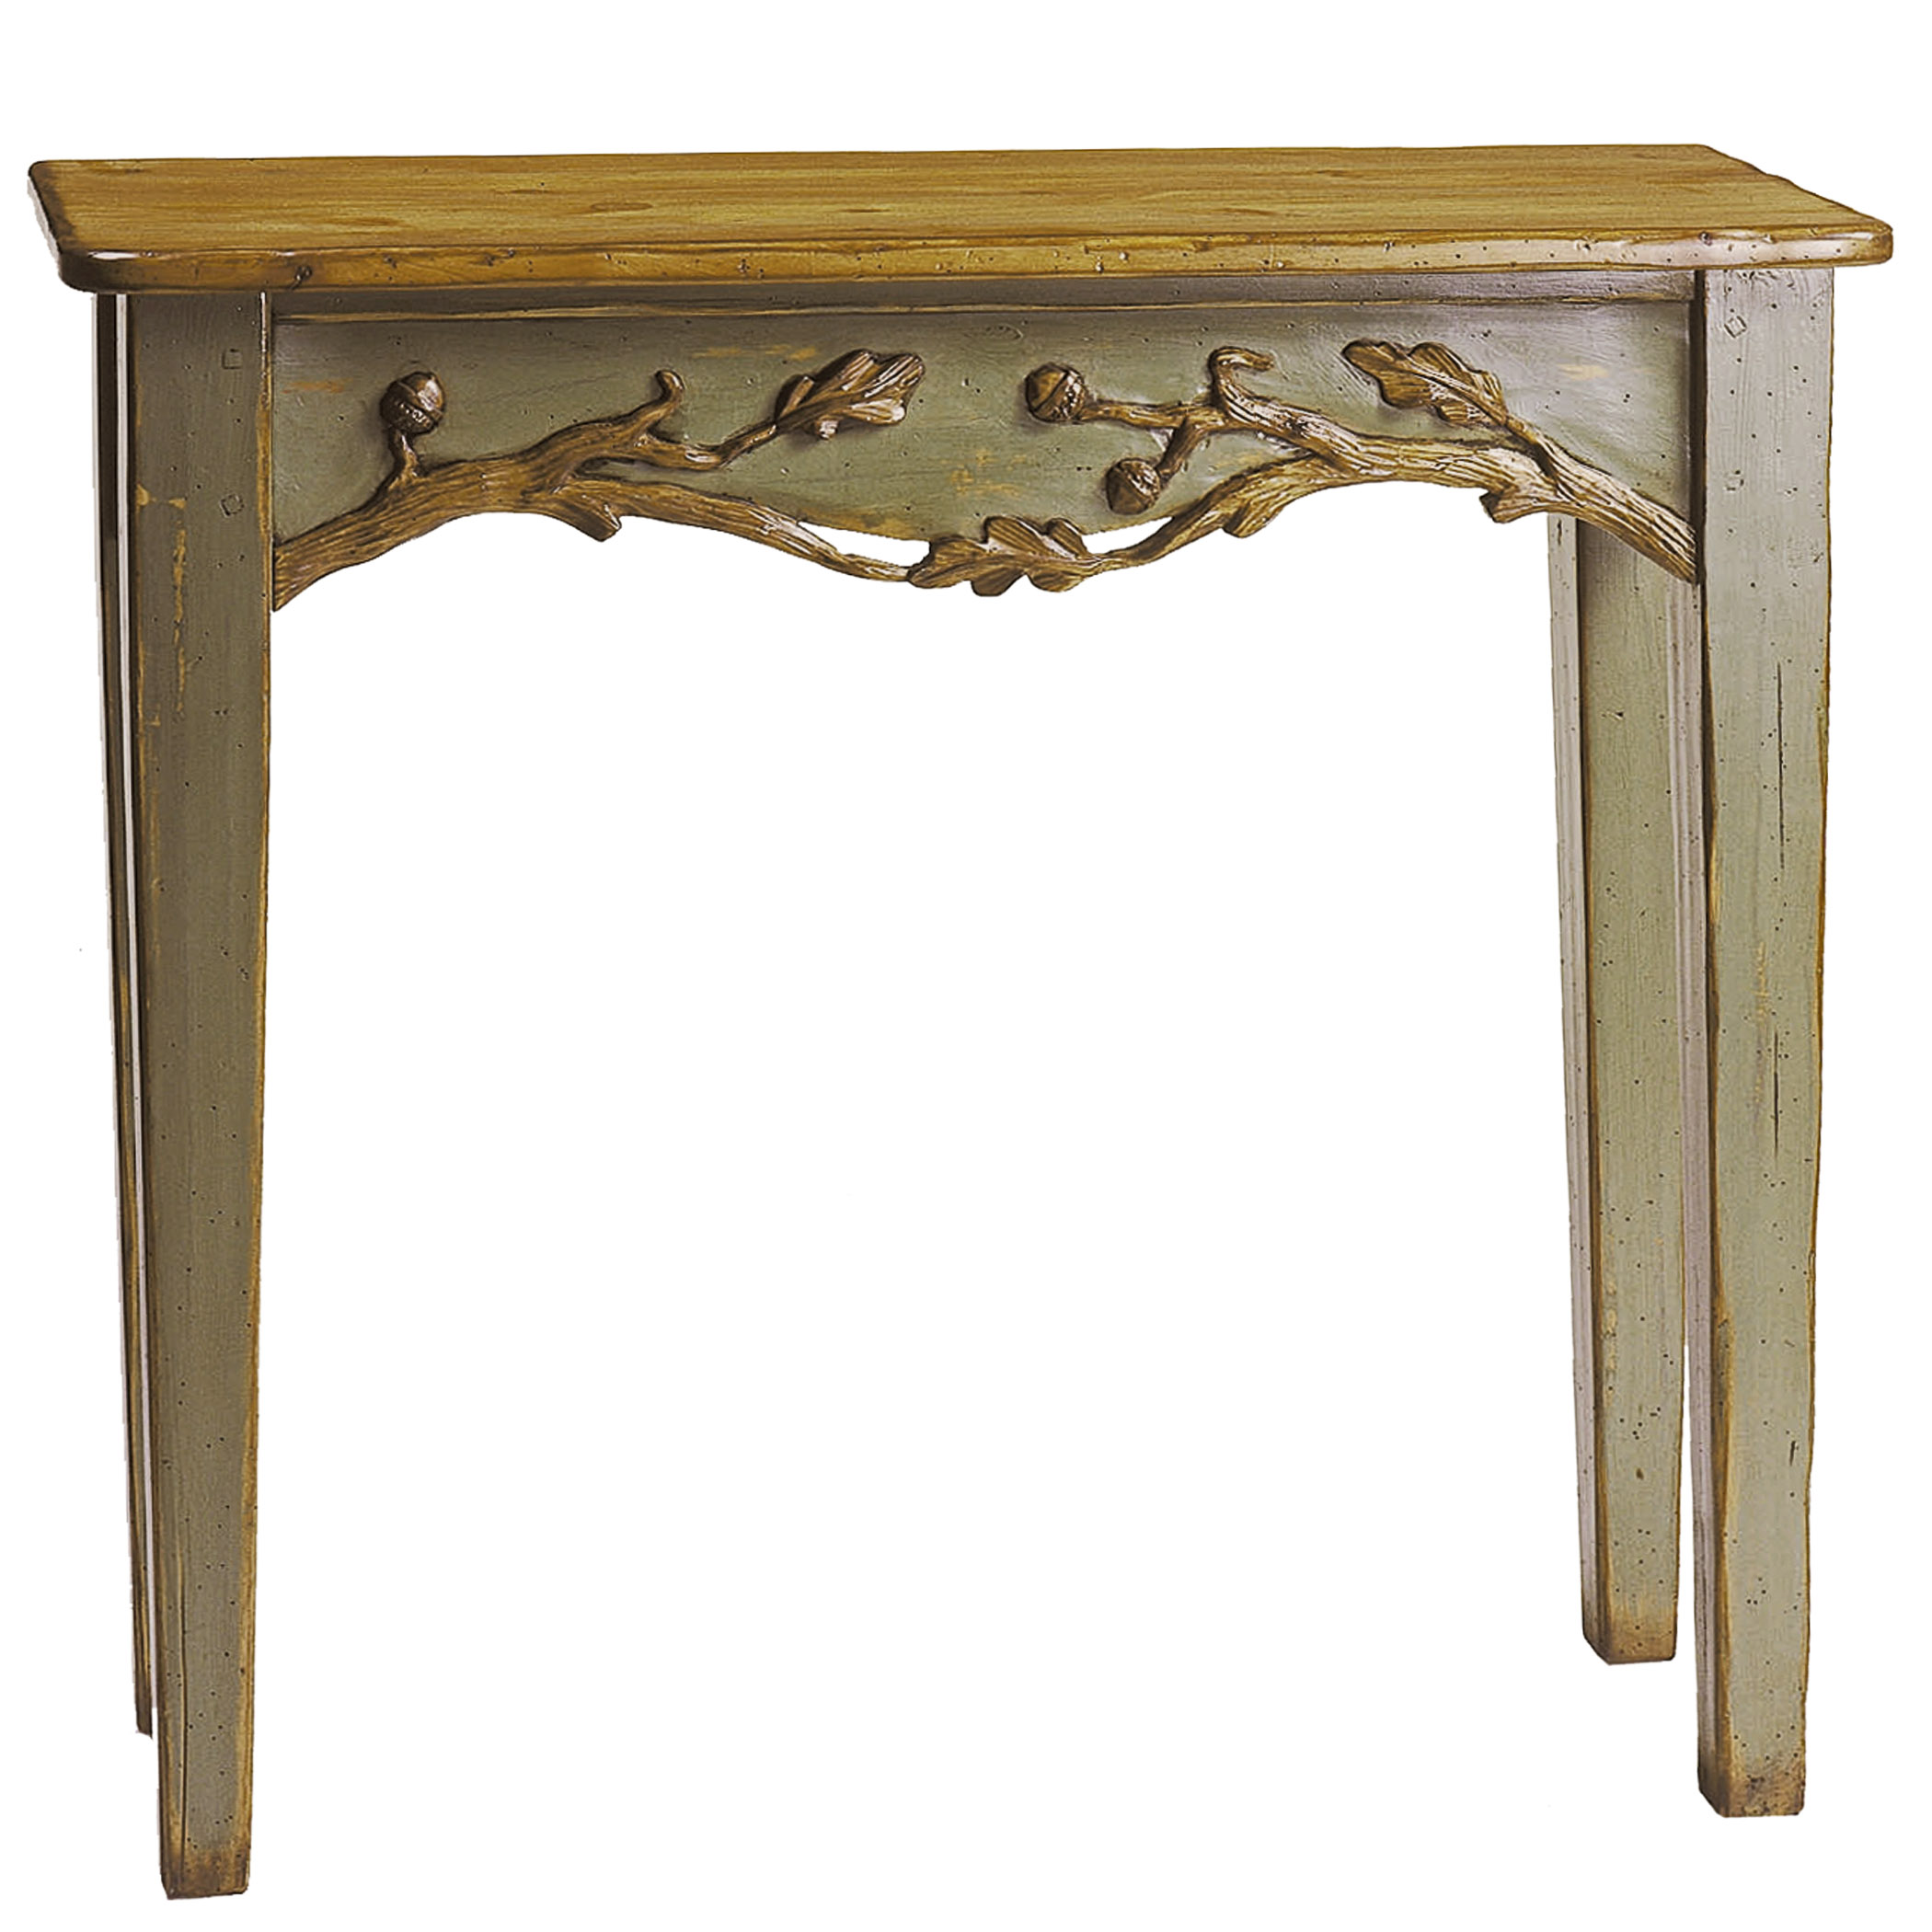 Josette traditional french country console side table with carved motif by Woodland furniture in Idaho Falls